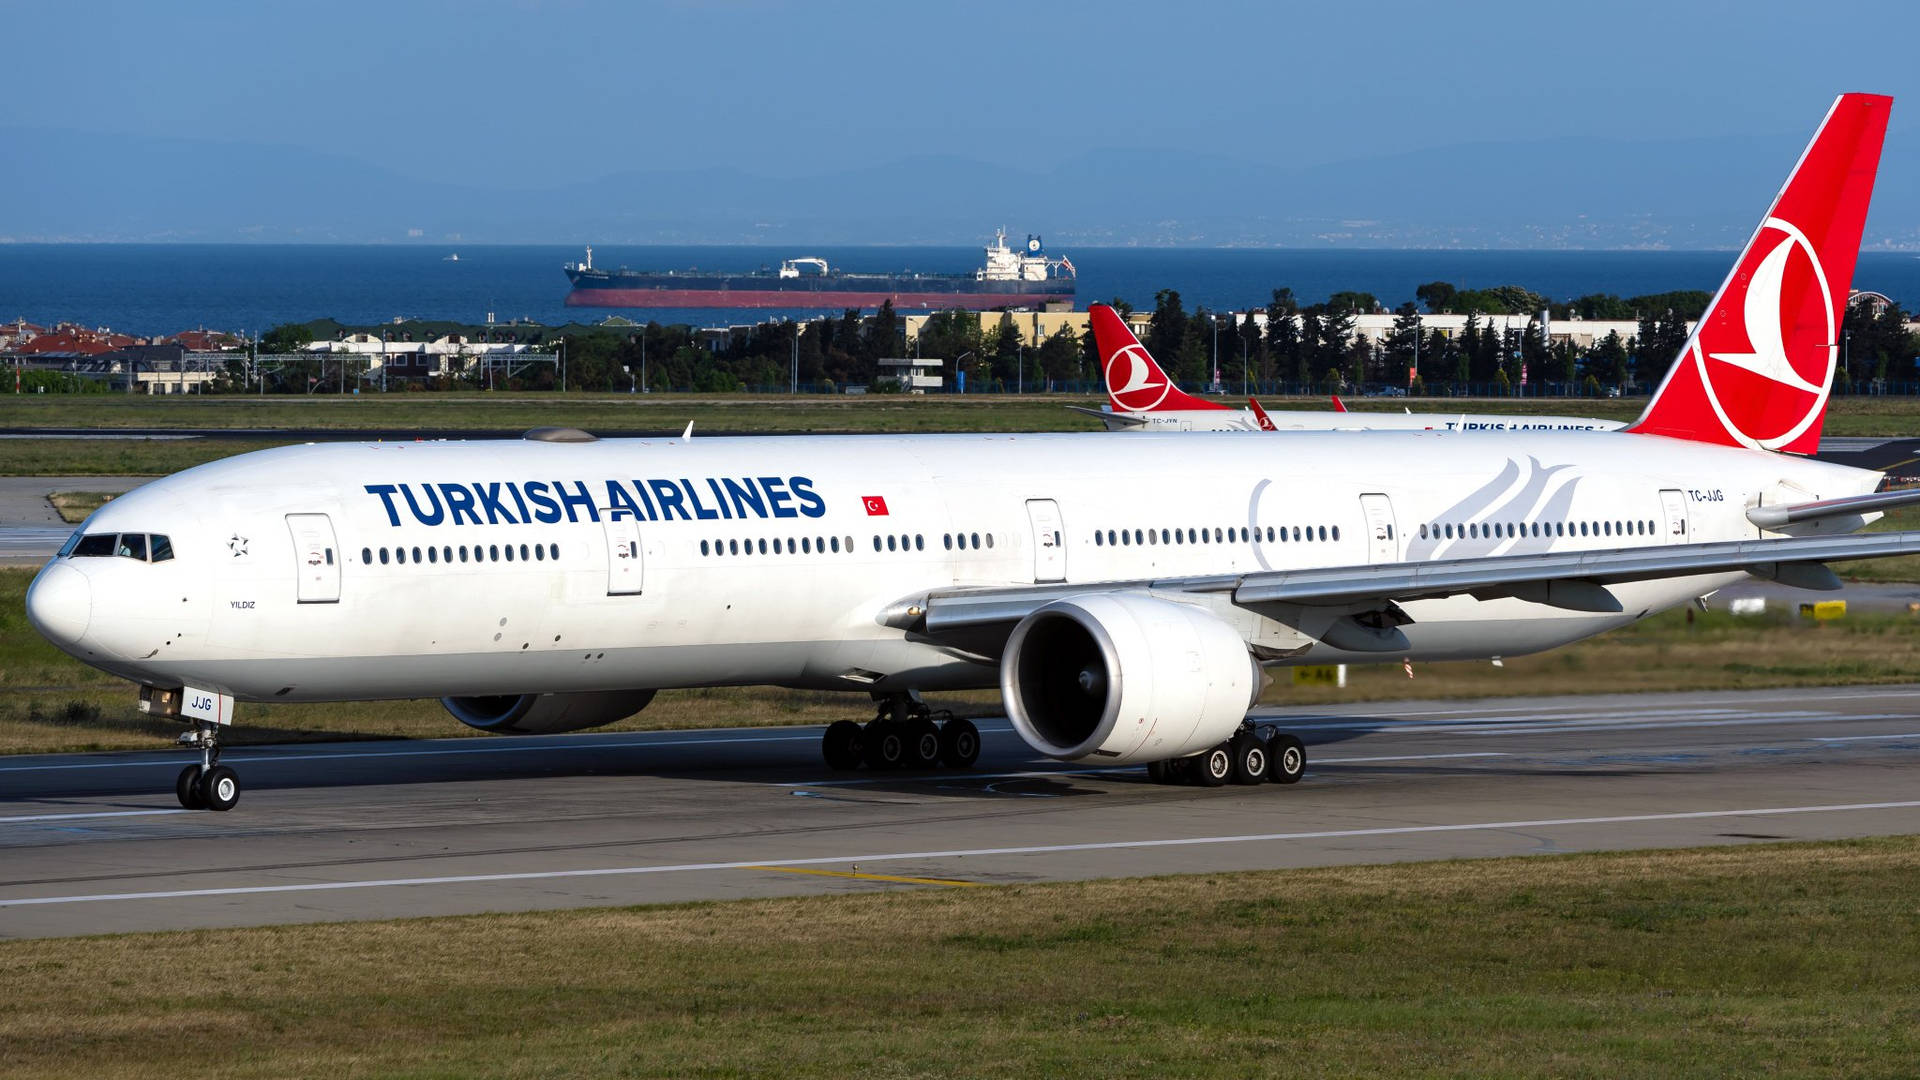 Turkish Airlines Airplane At Istanbul Airport Wallpaper